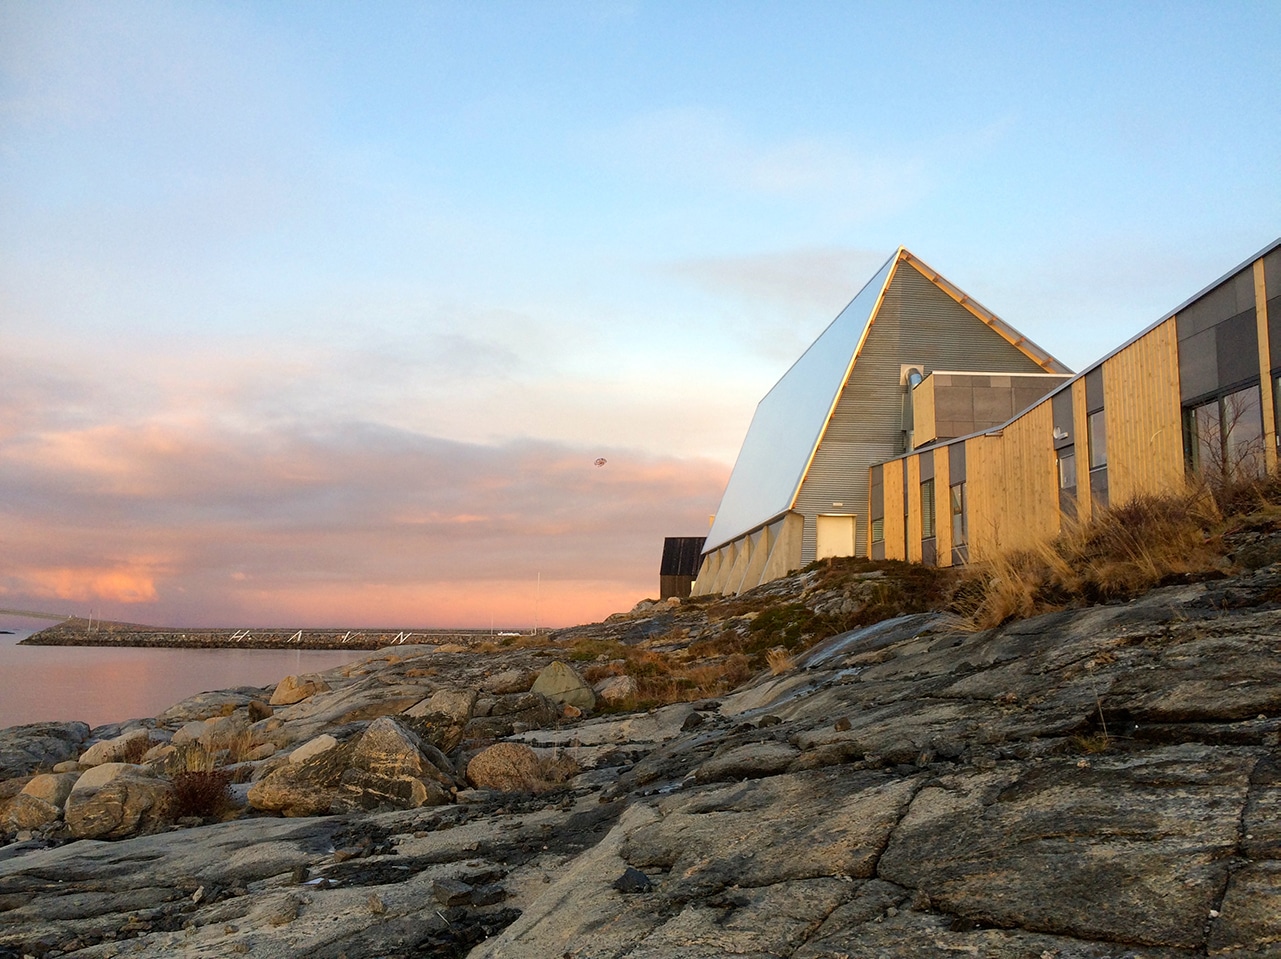 This Remote Norwegian Beach Resort Promises an Eco-Friendly Escape